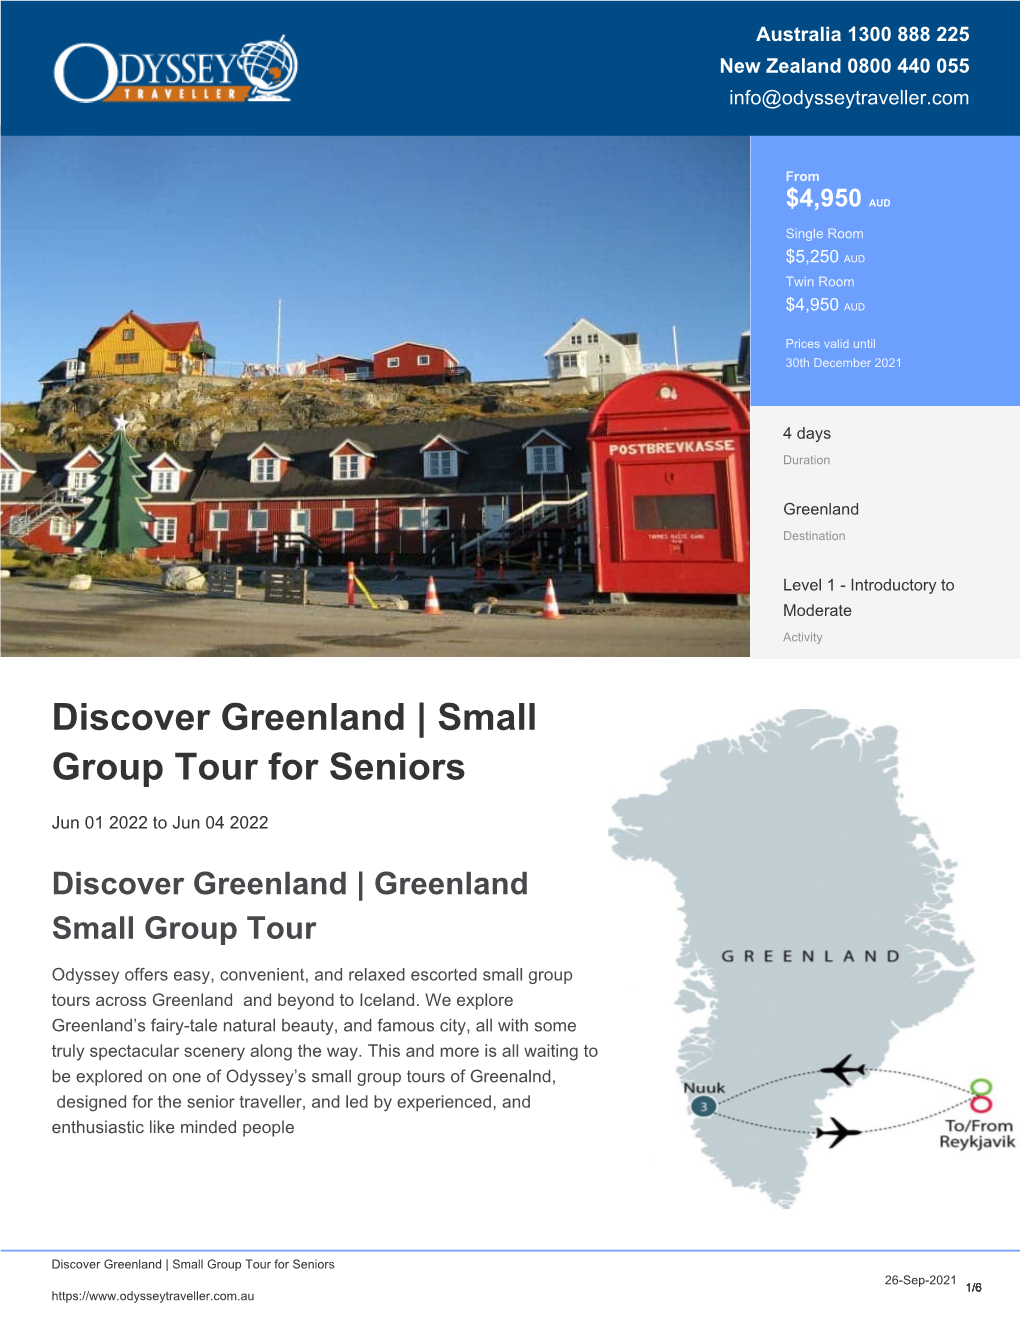 Discover Greenland | Small Group Tour for Seniors | Odyssey Traveller